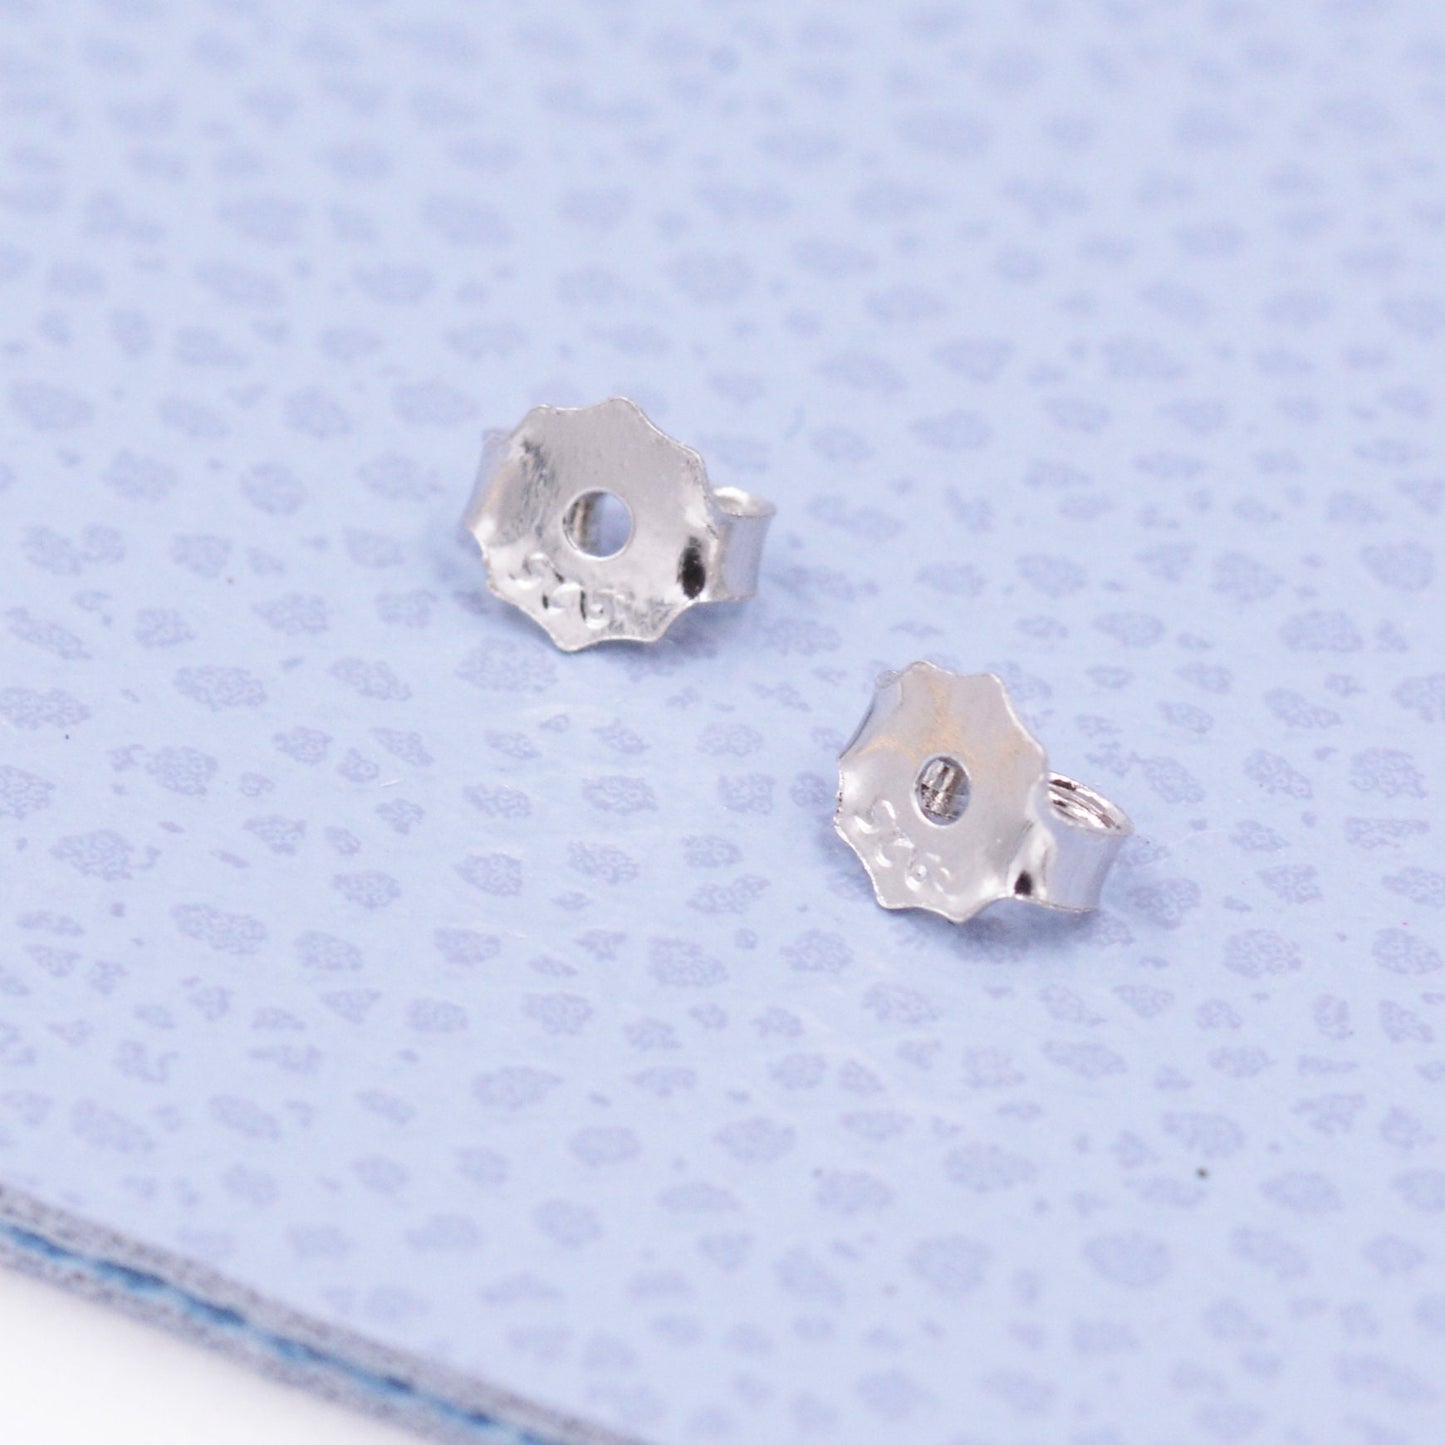 Sterling Silver White Topaz Marquise Stud Earrings, Gold or Silver, Minimalist Geometric Design